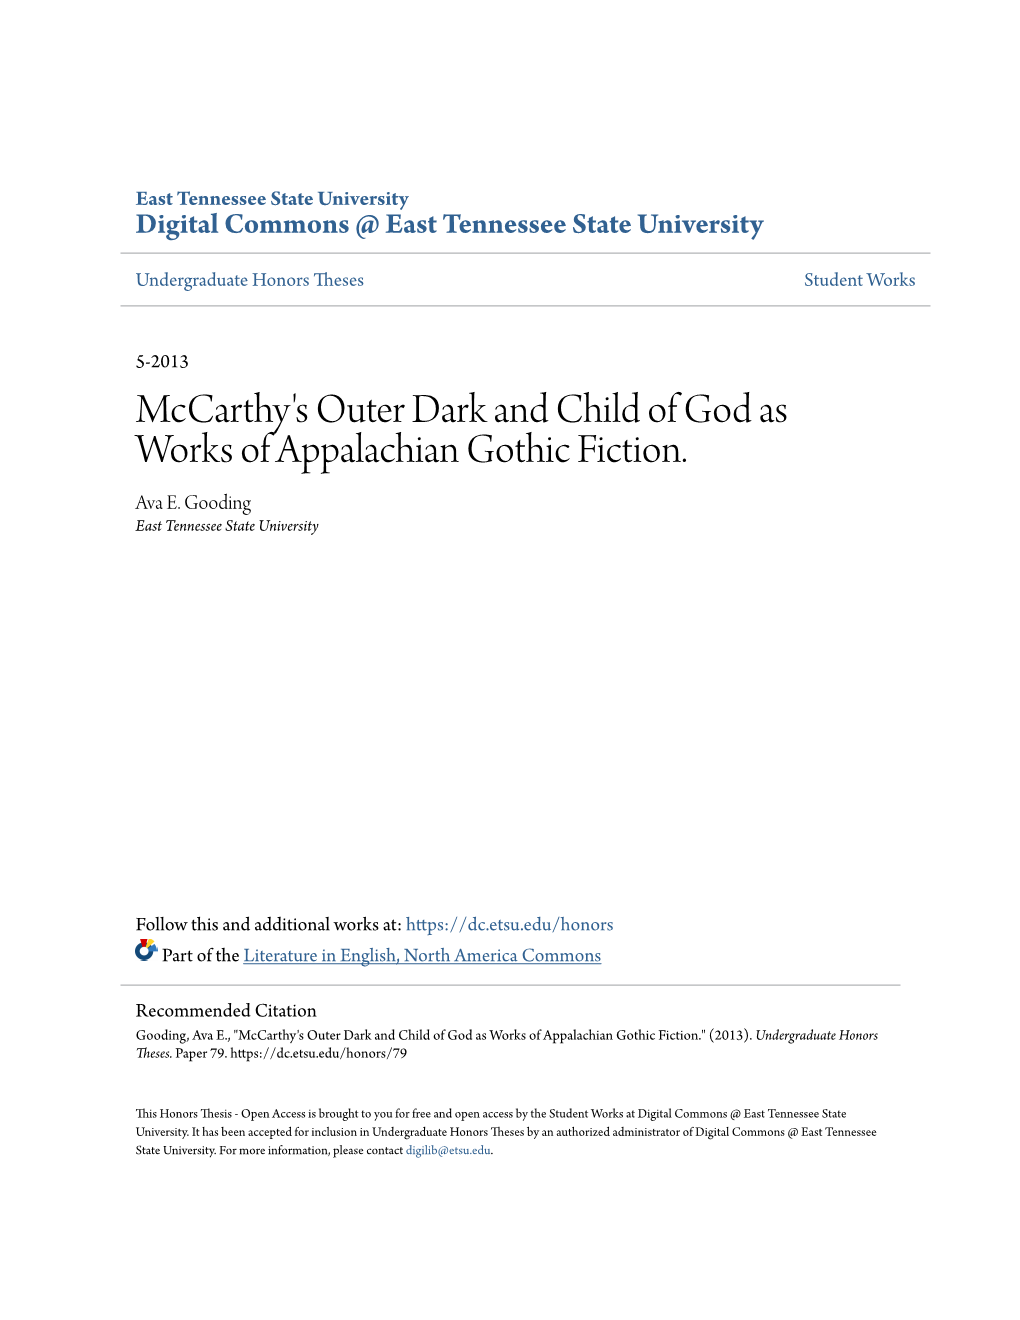 Mccarthy's Outer Dark and Child of God As Works of Appalachian Gothic Fiction